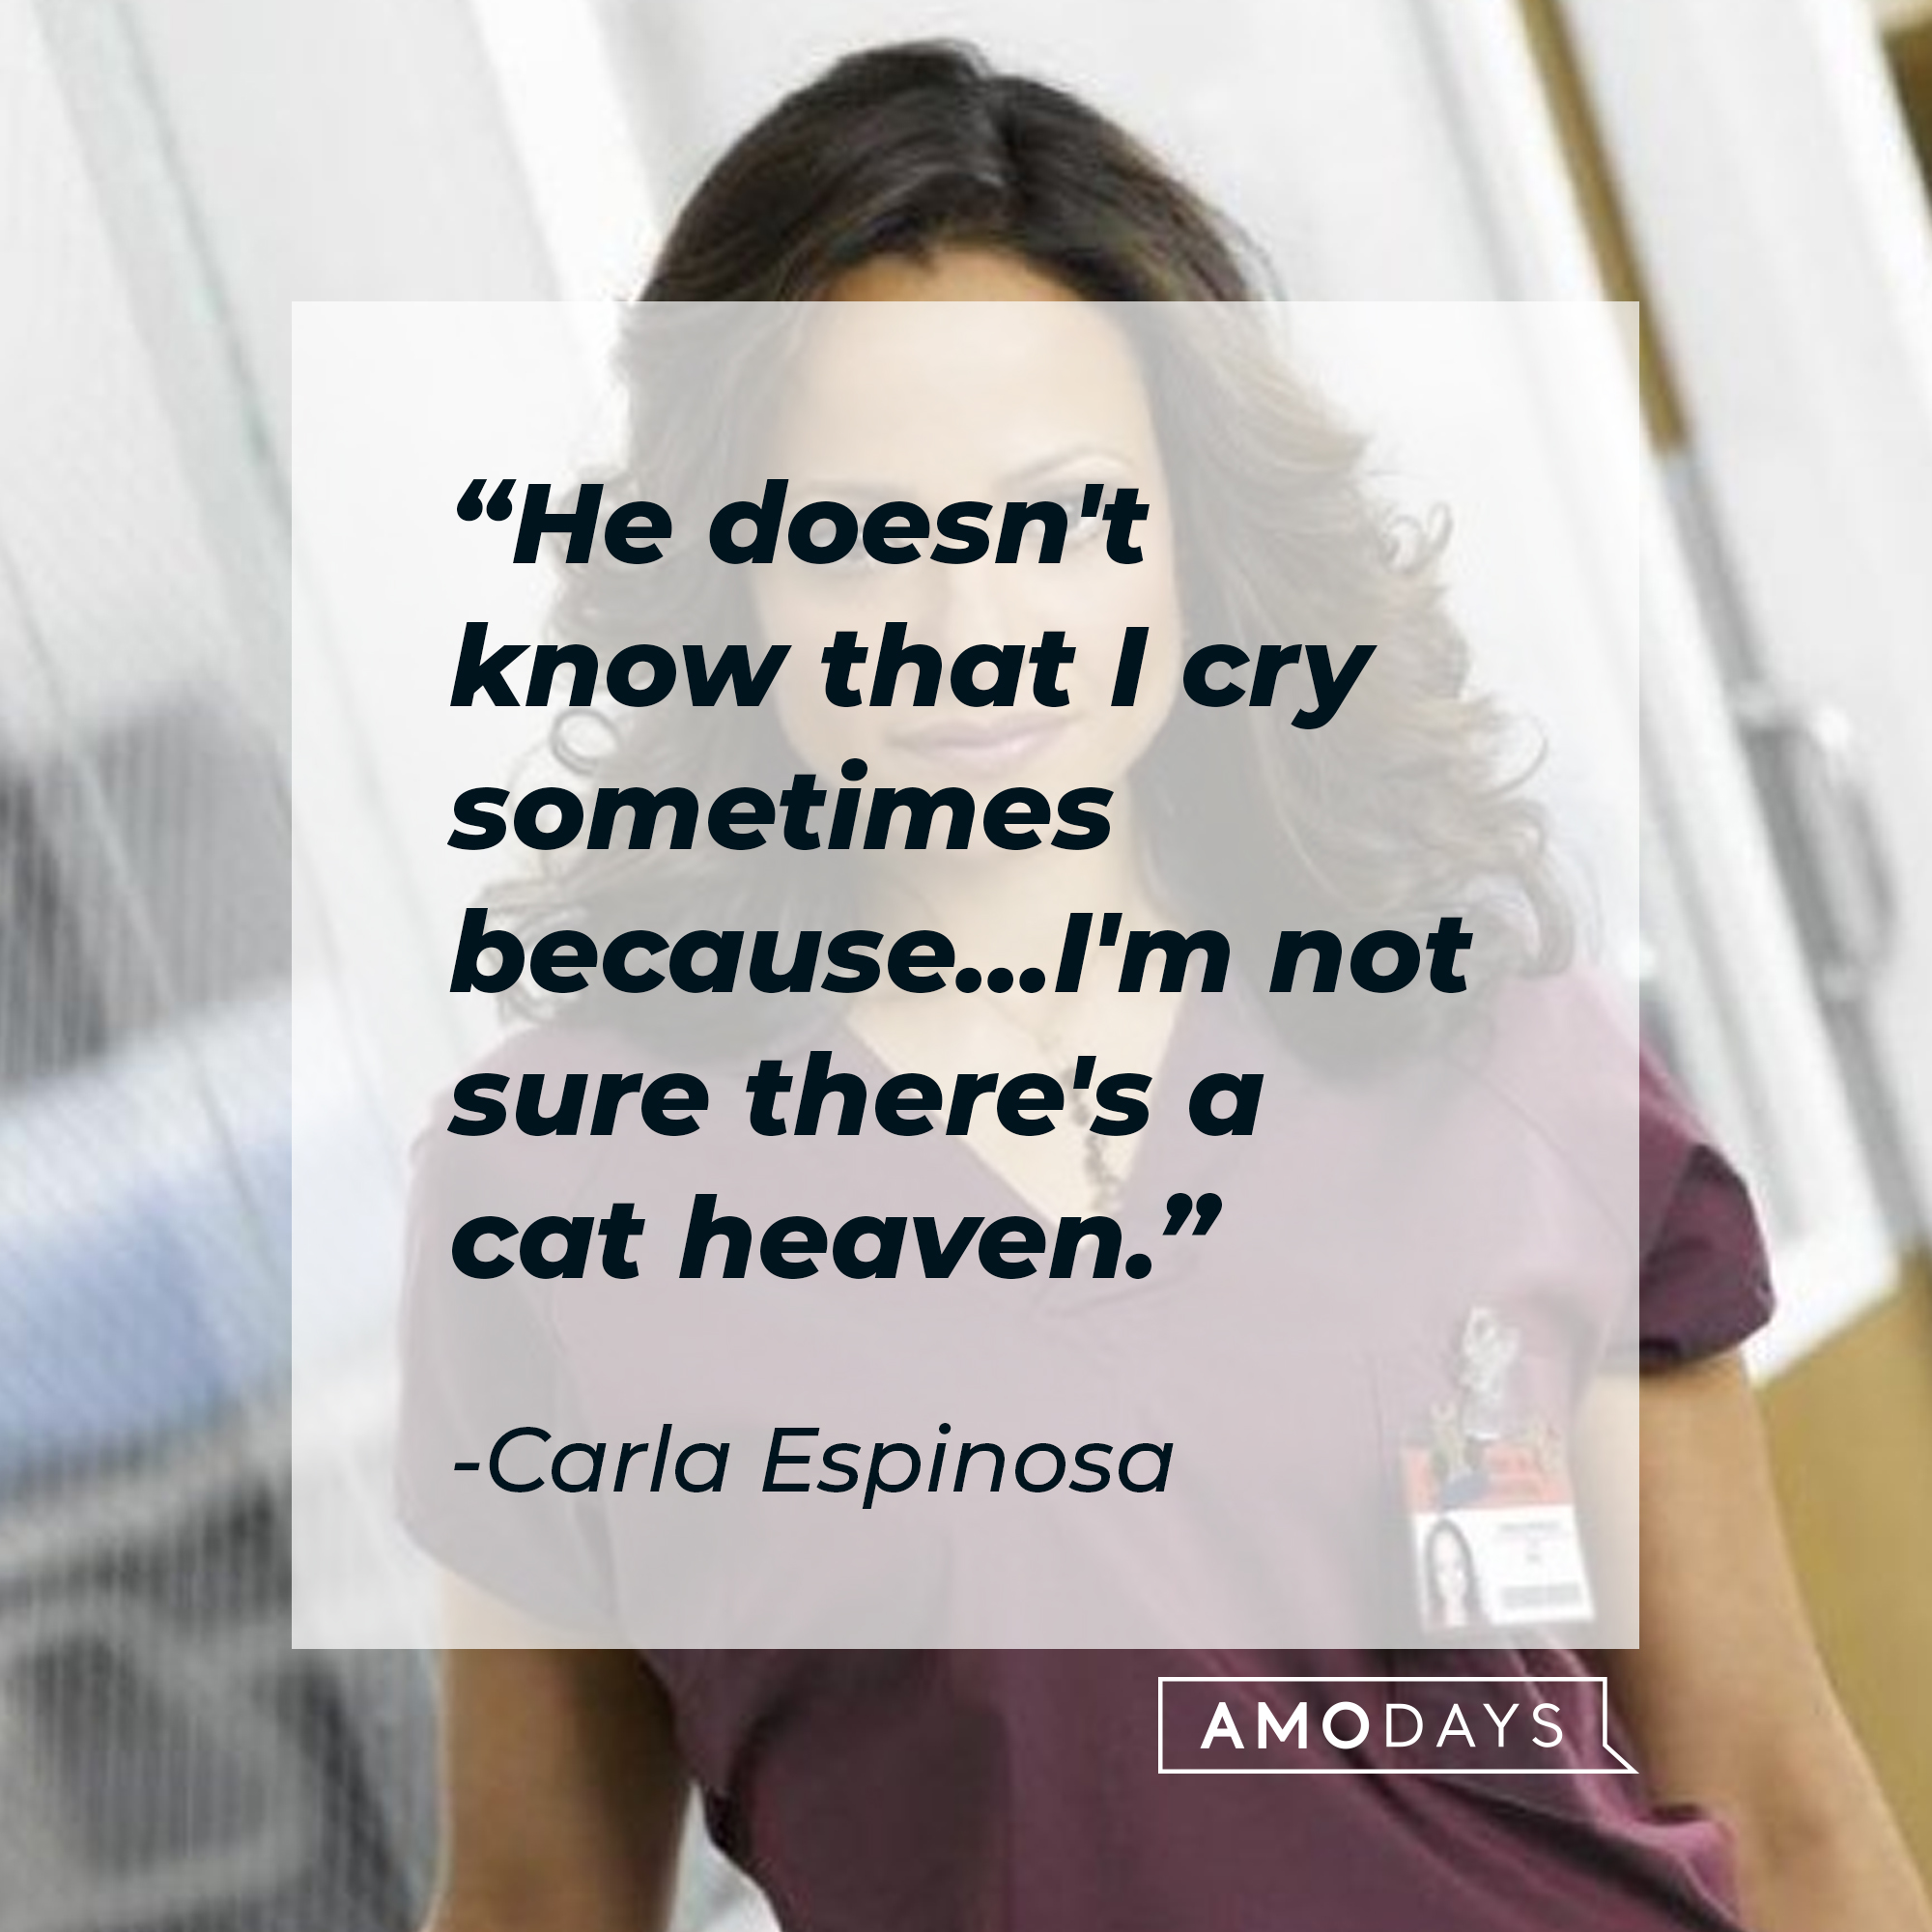 Carla Espinosa with her quote: “He doesn't know that I cry sometimes because... I'm not sure there's a cat heaven.” | Source: Facebook.com/scrubs